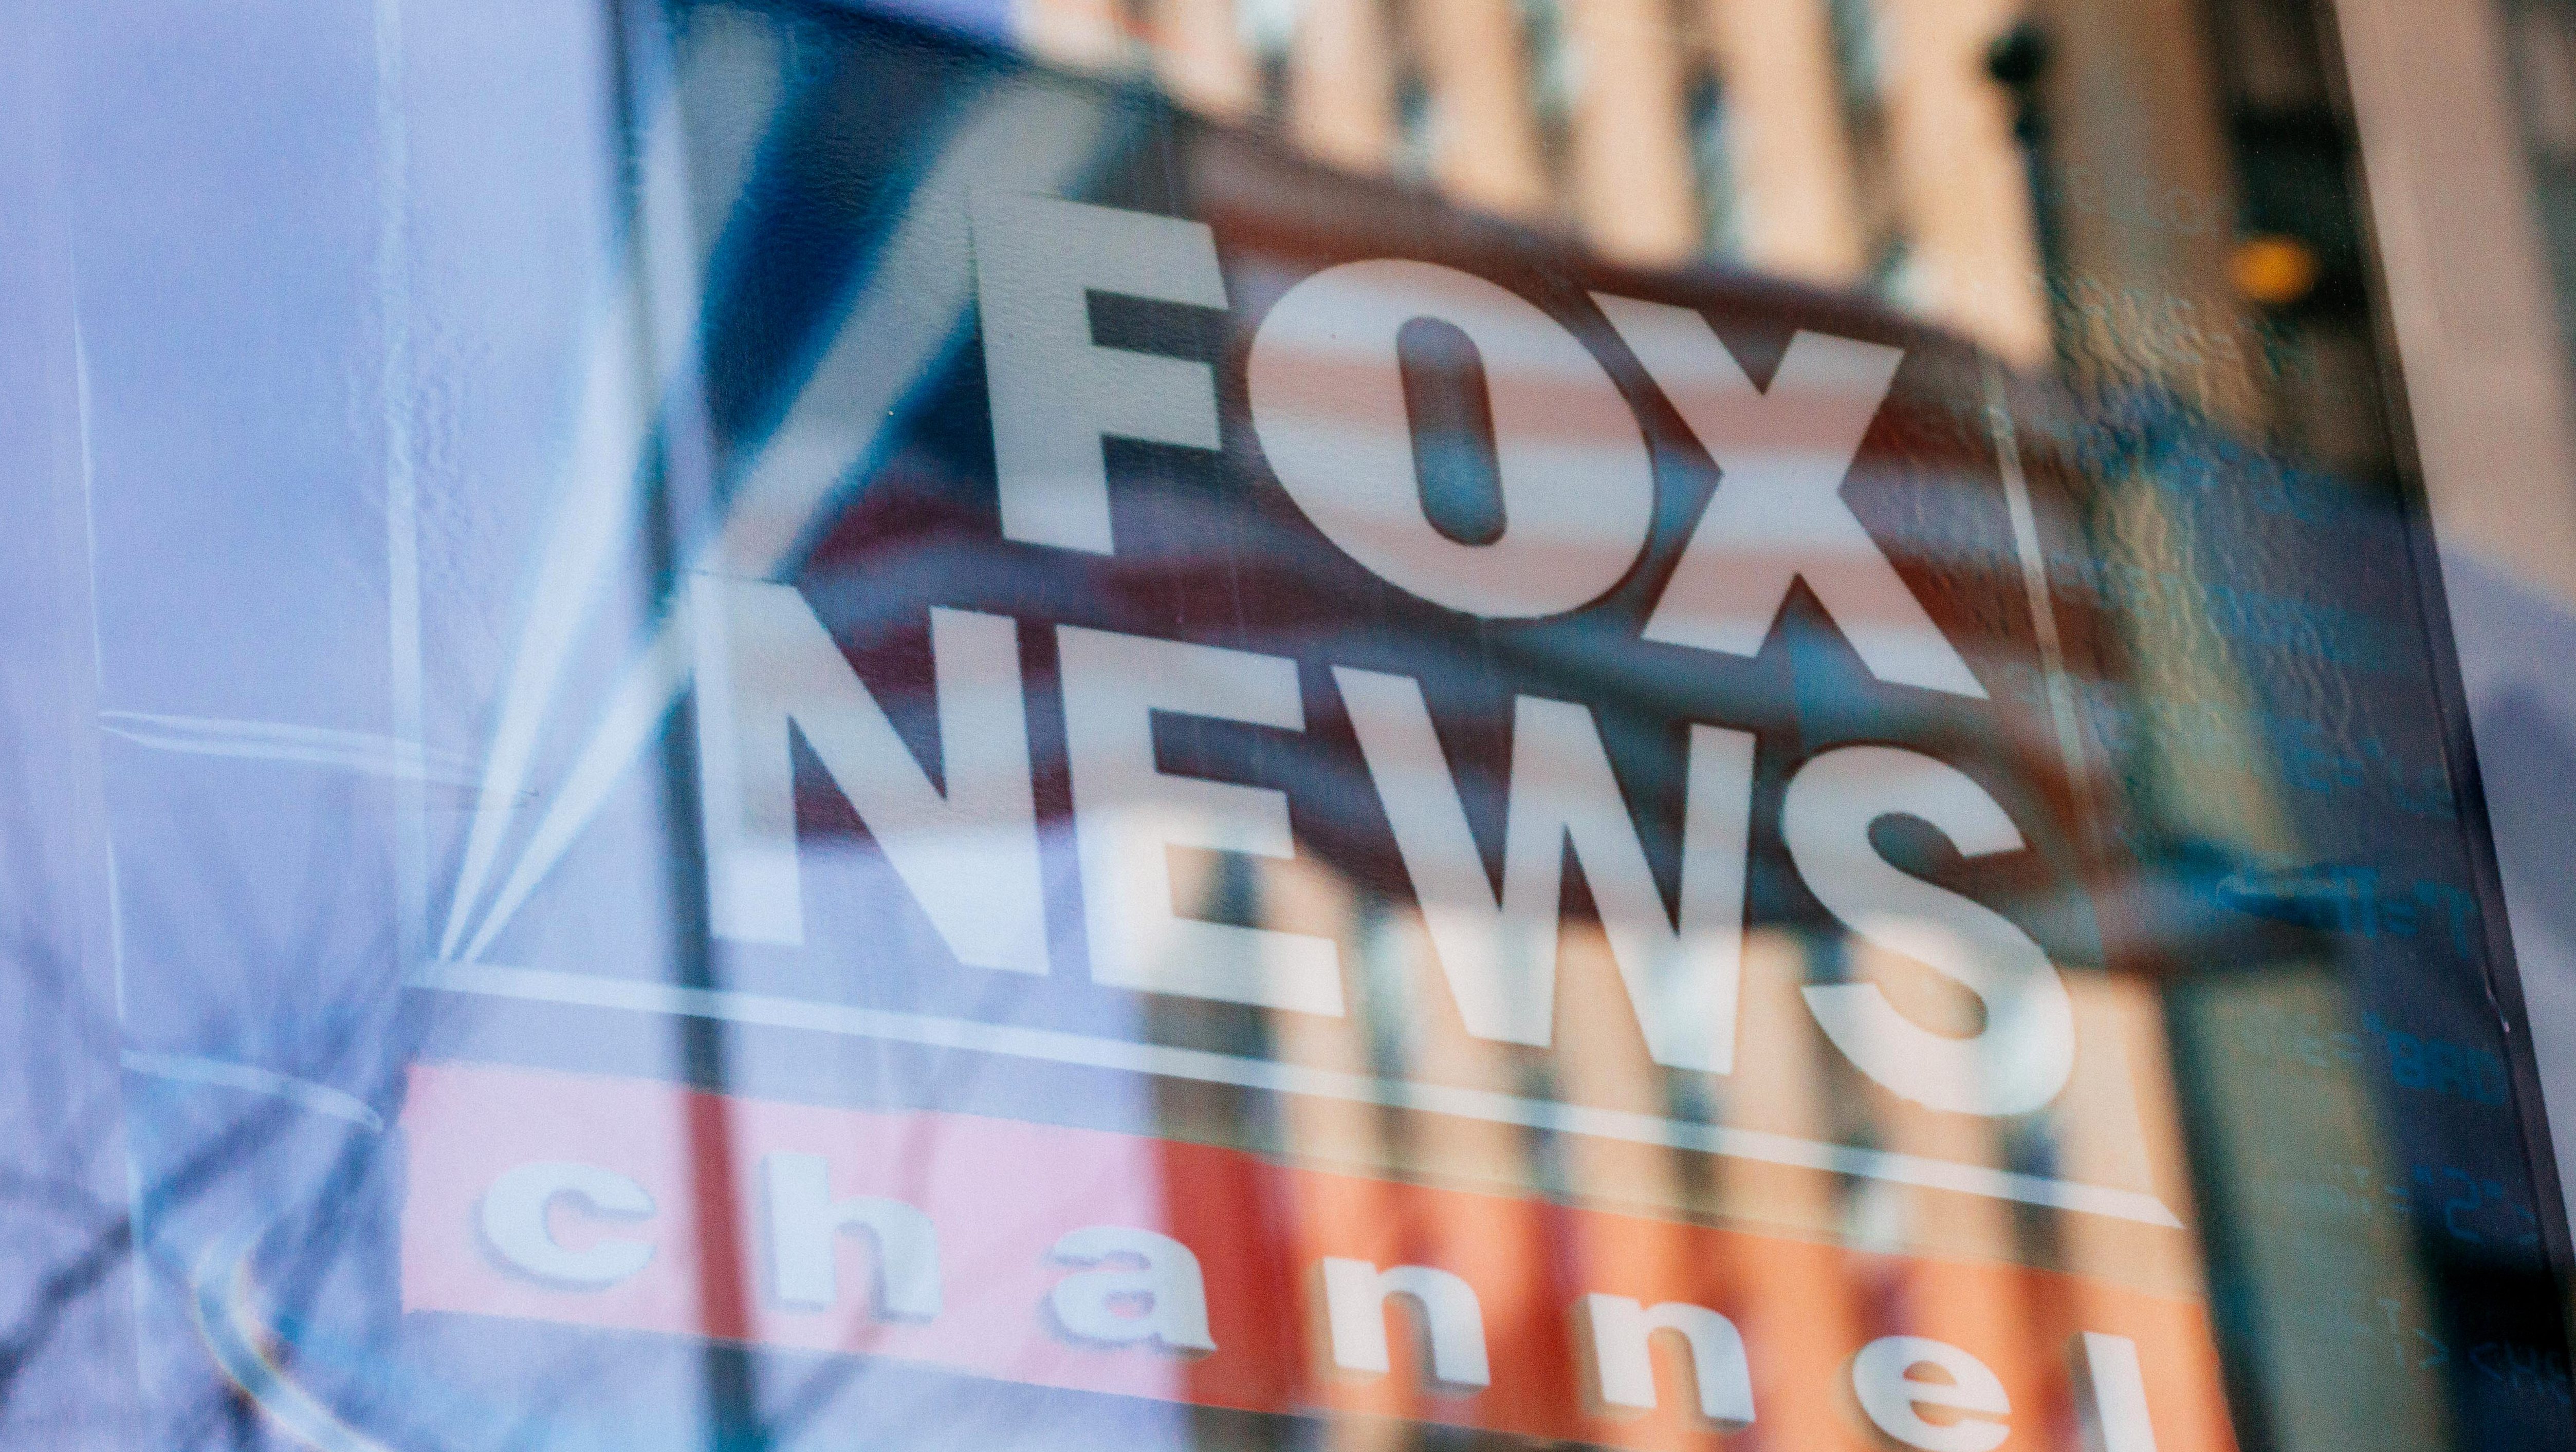 how can i view fox news without cable